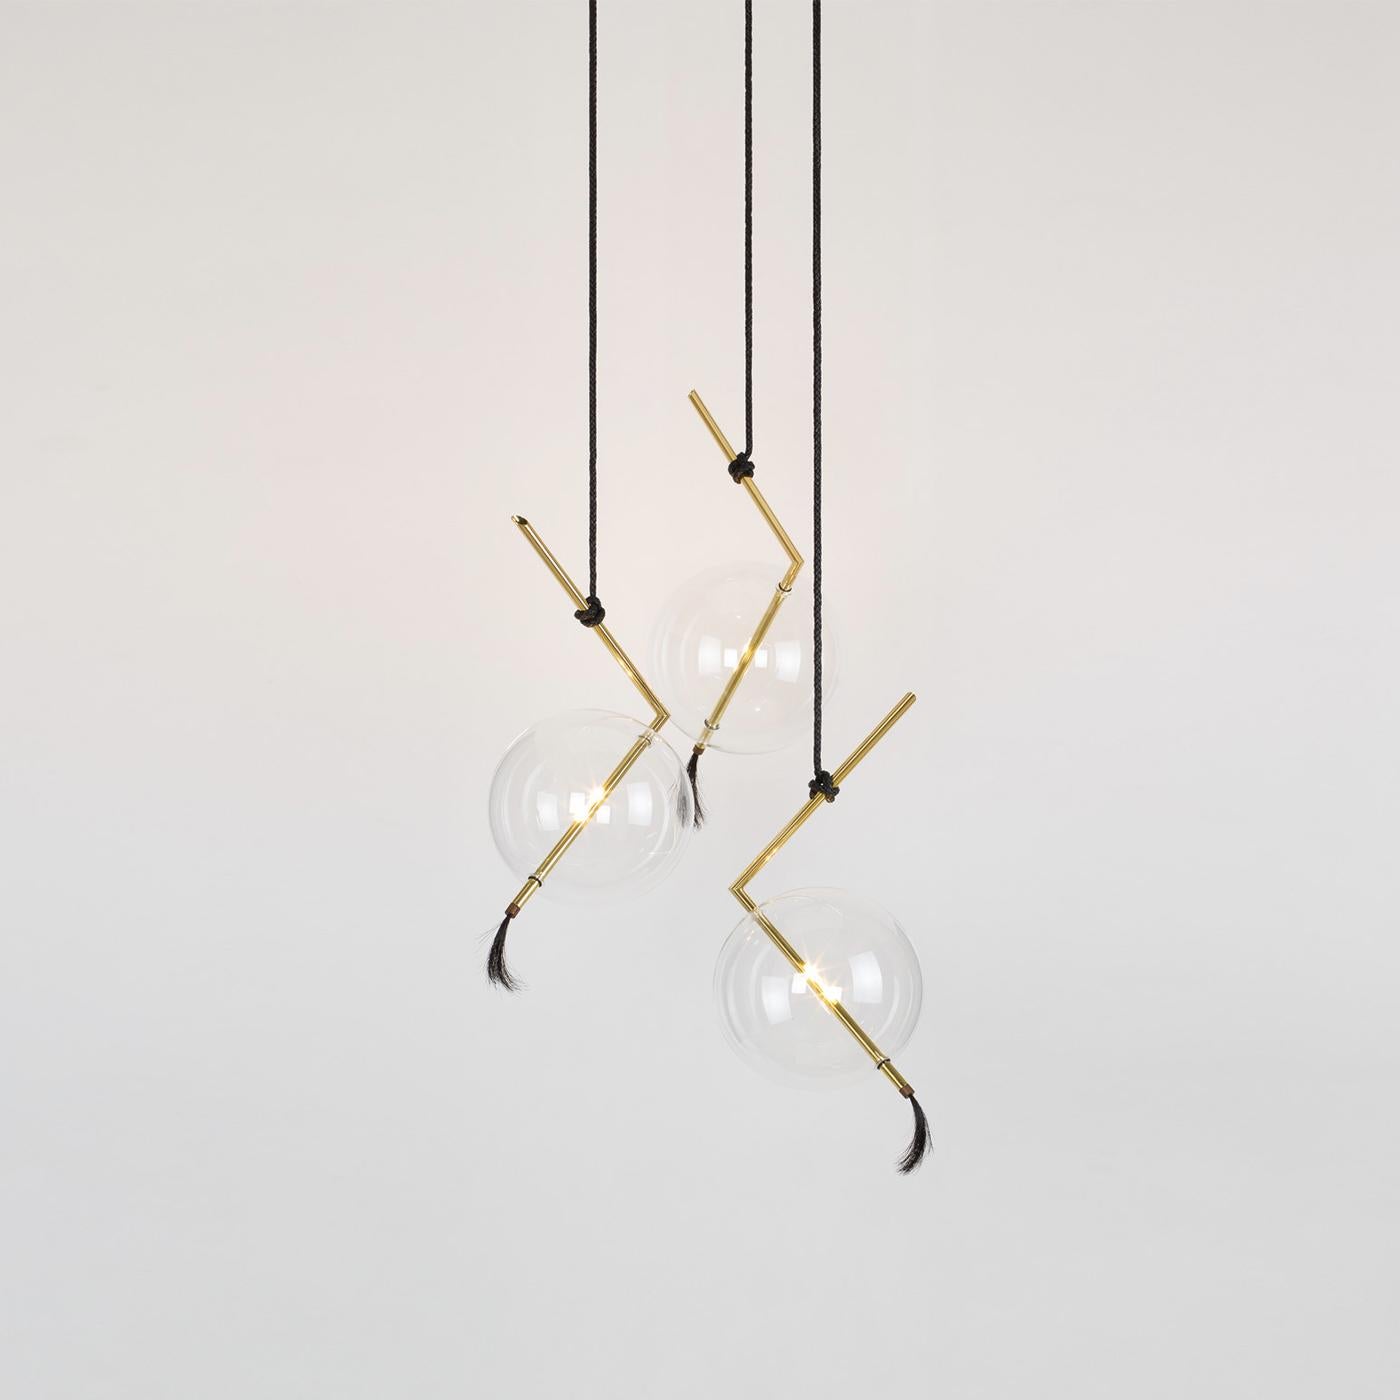 This contemporary chandelier is inspired by a circus trapeze and its form allows for the lights to be adjusted separately in any direction. The glass elements are hand blown in different forms linked by brass bars and hung on linen cords from hub